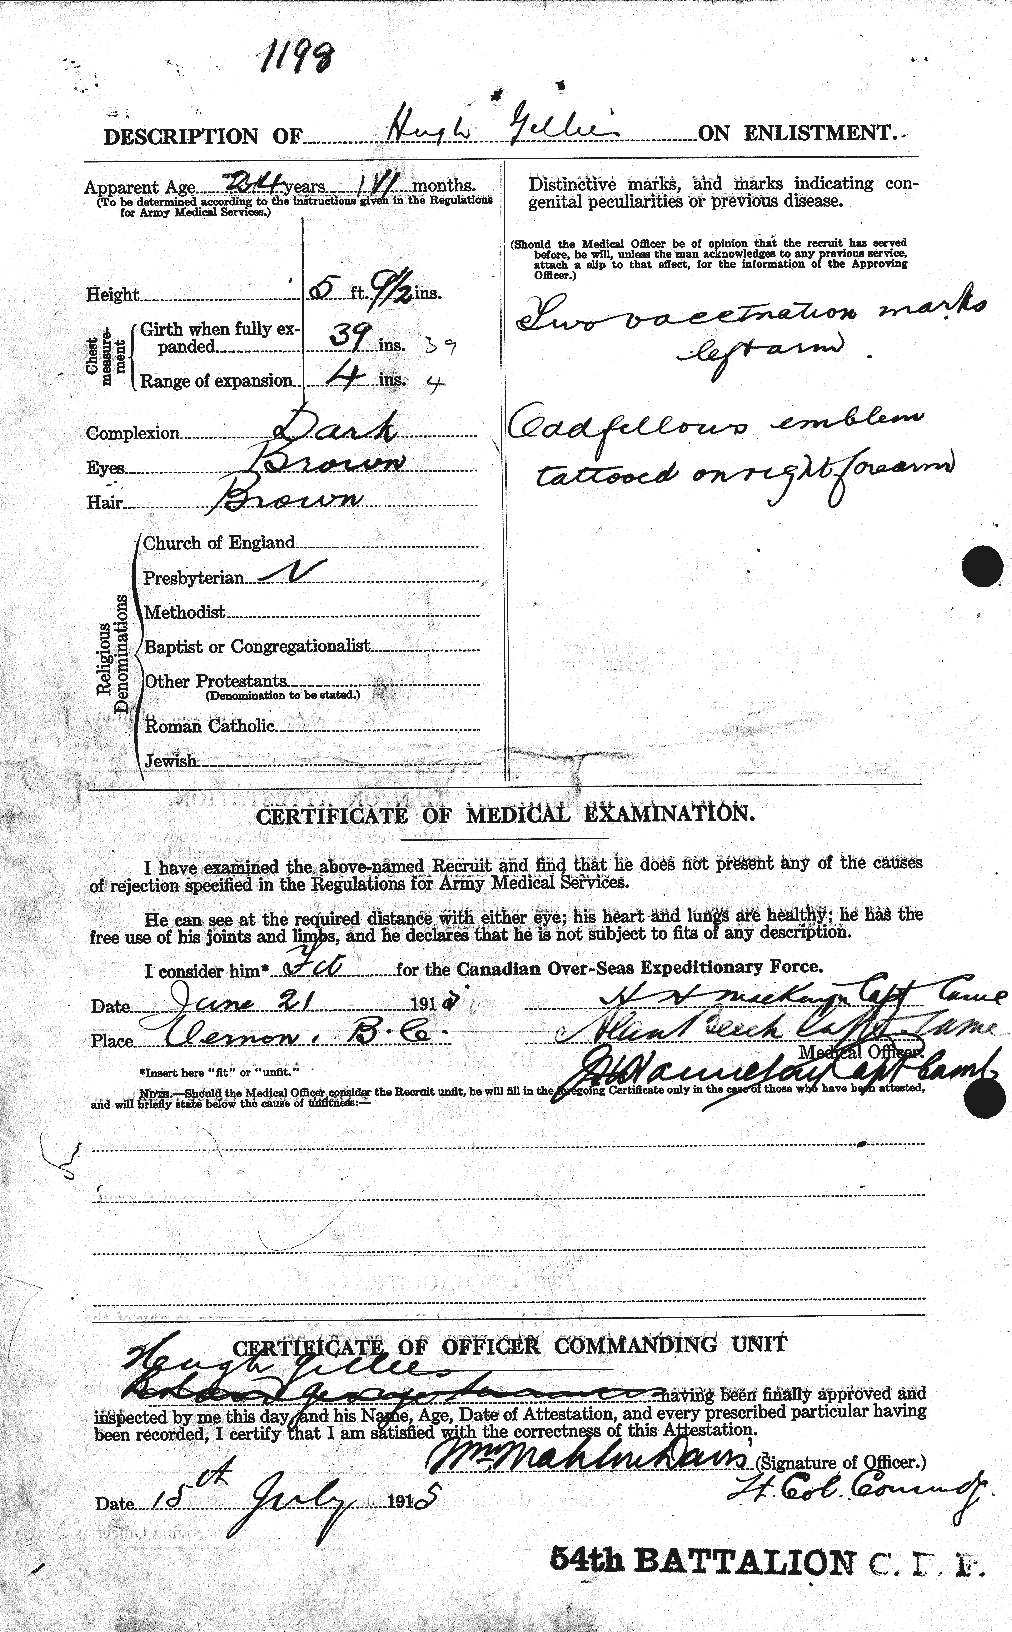 Personnel Records of the First World War - CEF 353165b